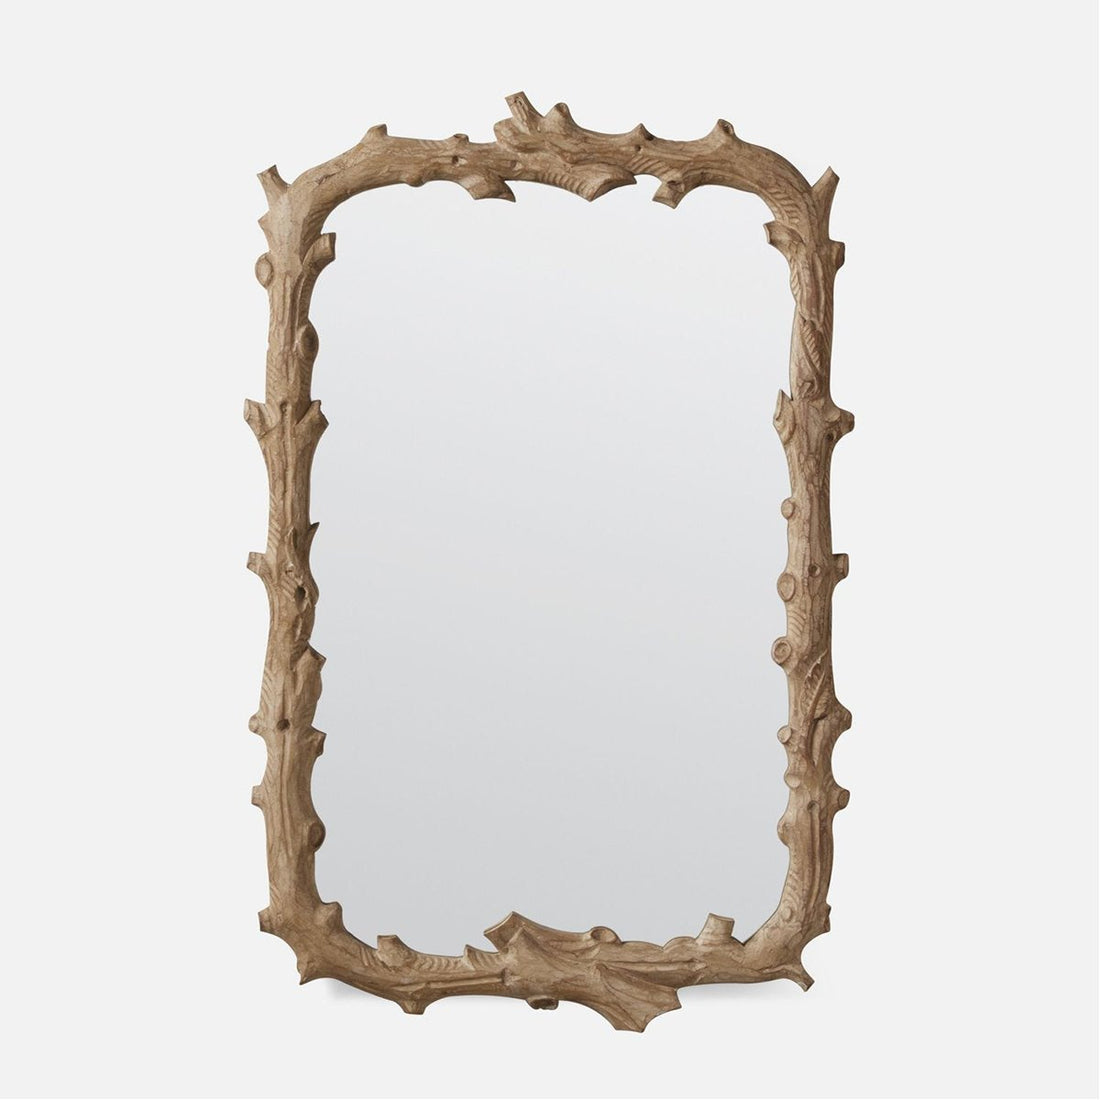 Made Goods Ranell Realistic-Looking Branch Mango Wood Mirror